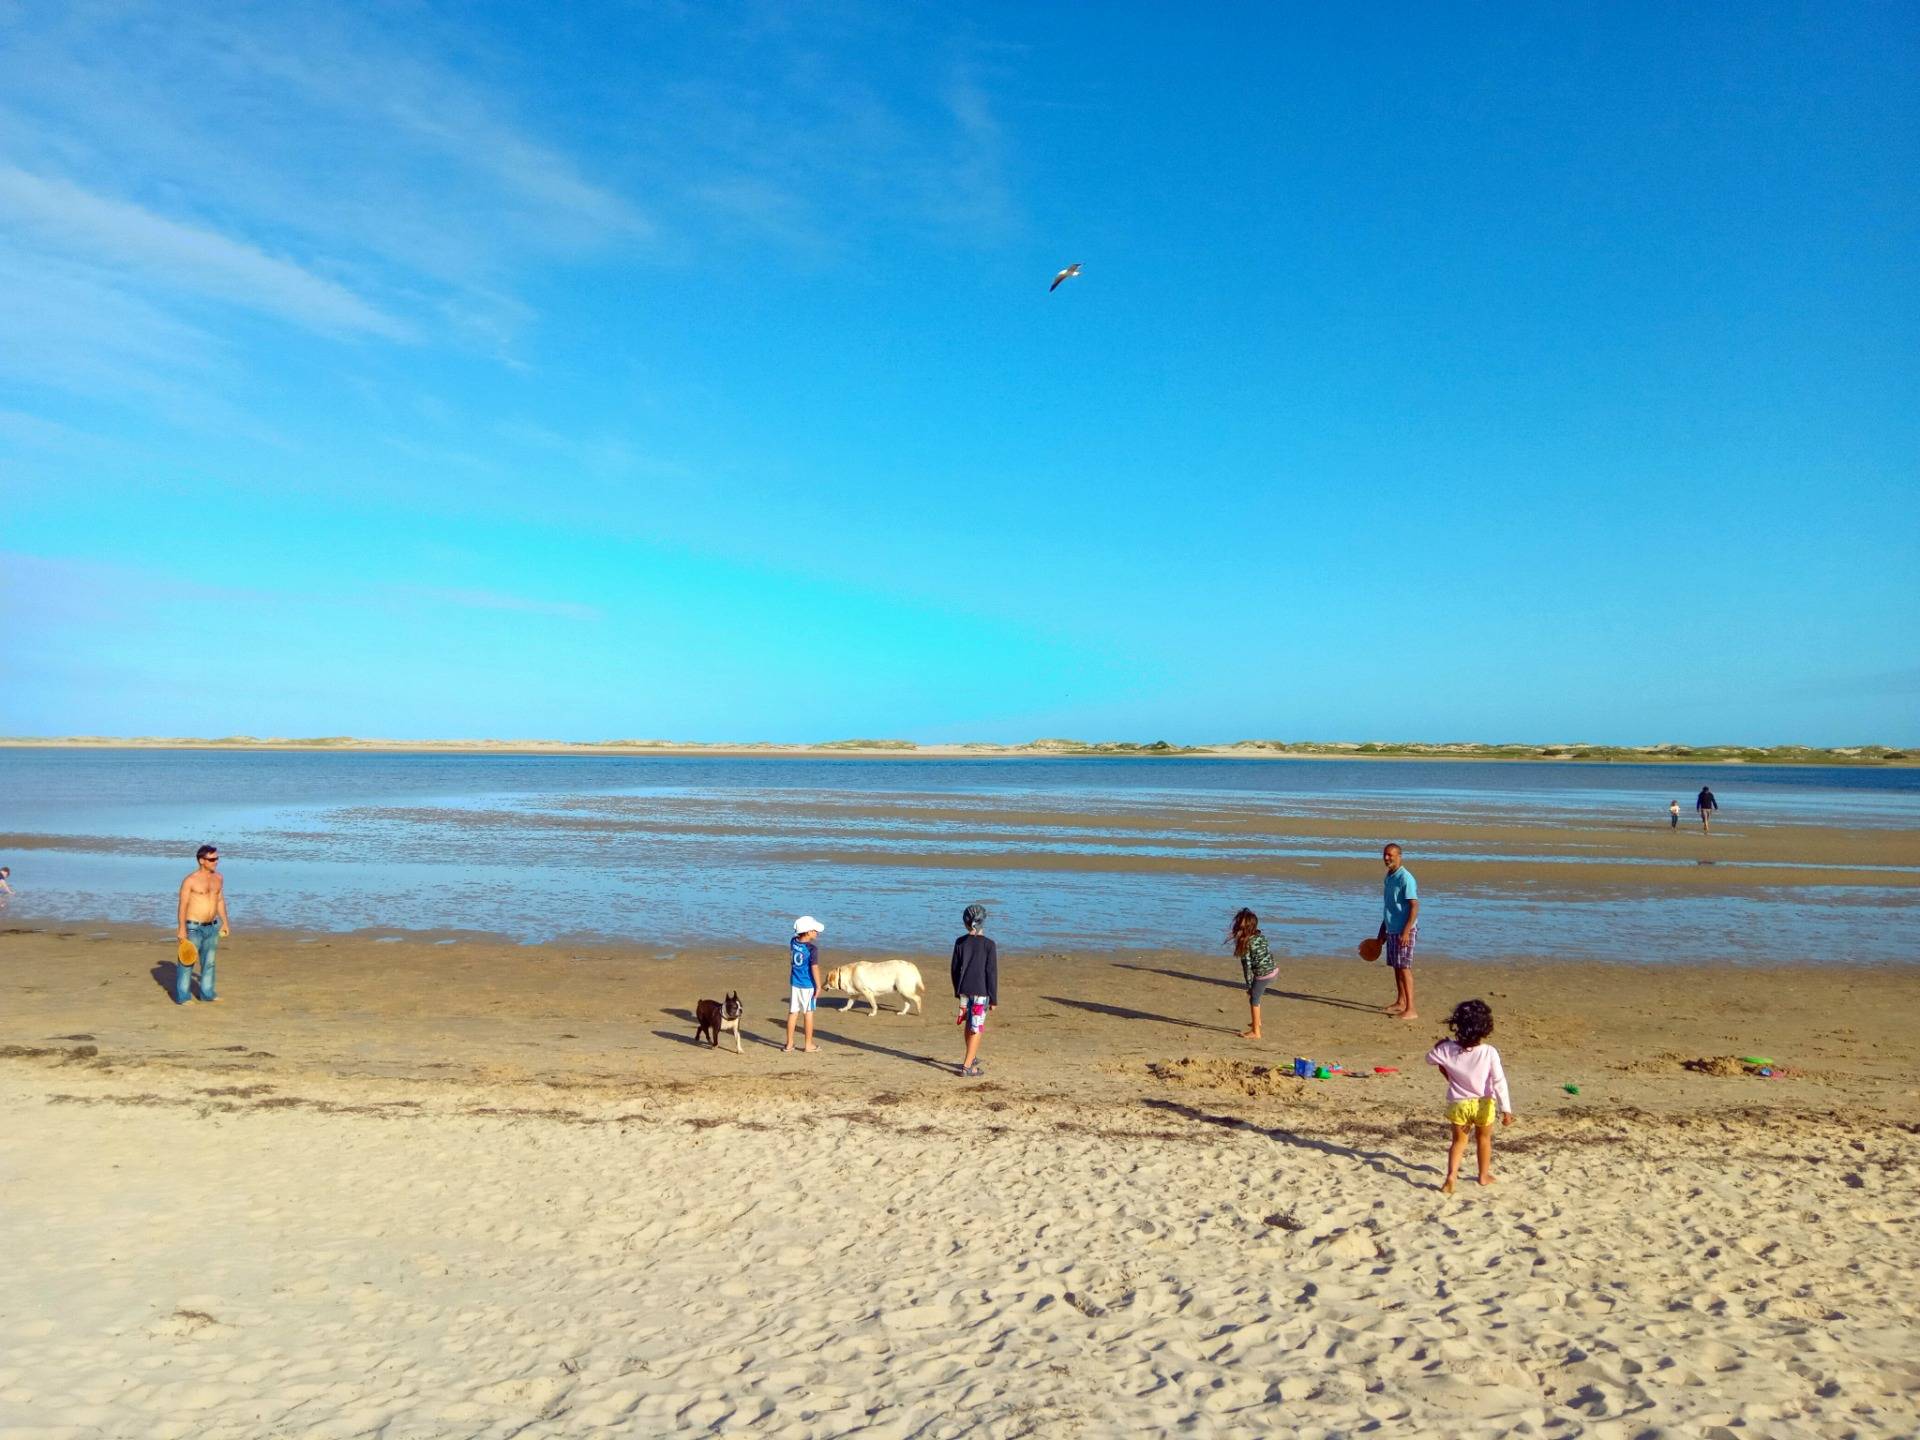 Low tide at Keurbooms lagoon makes for a safe family playground with the ocean just behind the dune in the background.